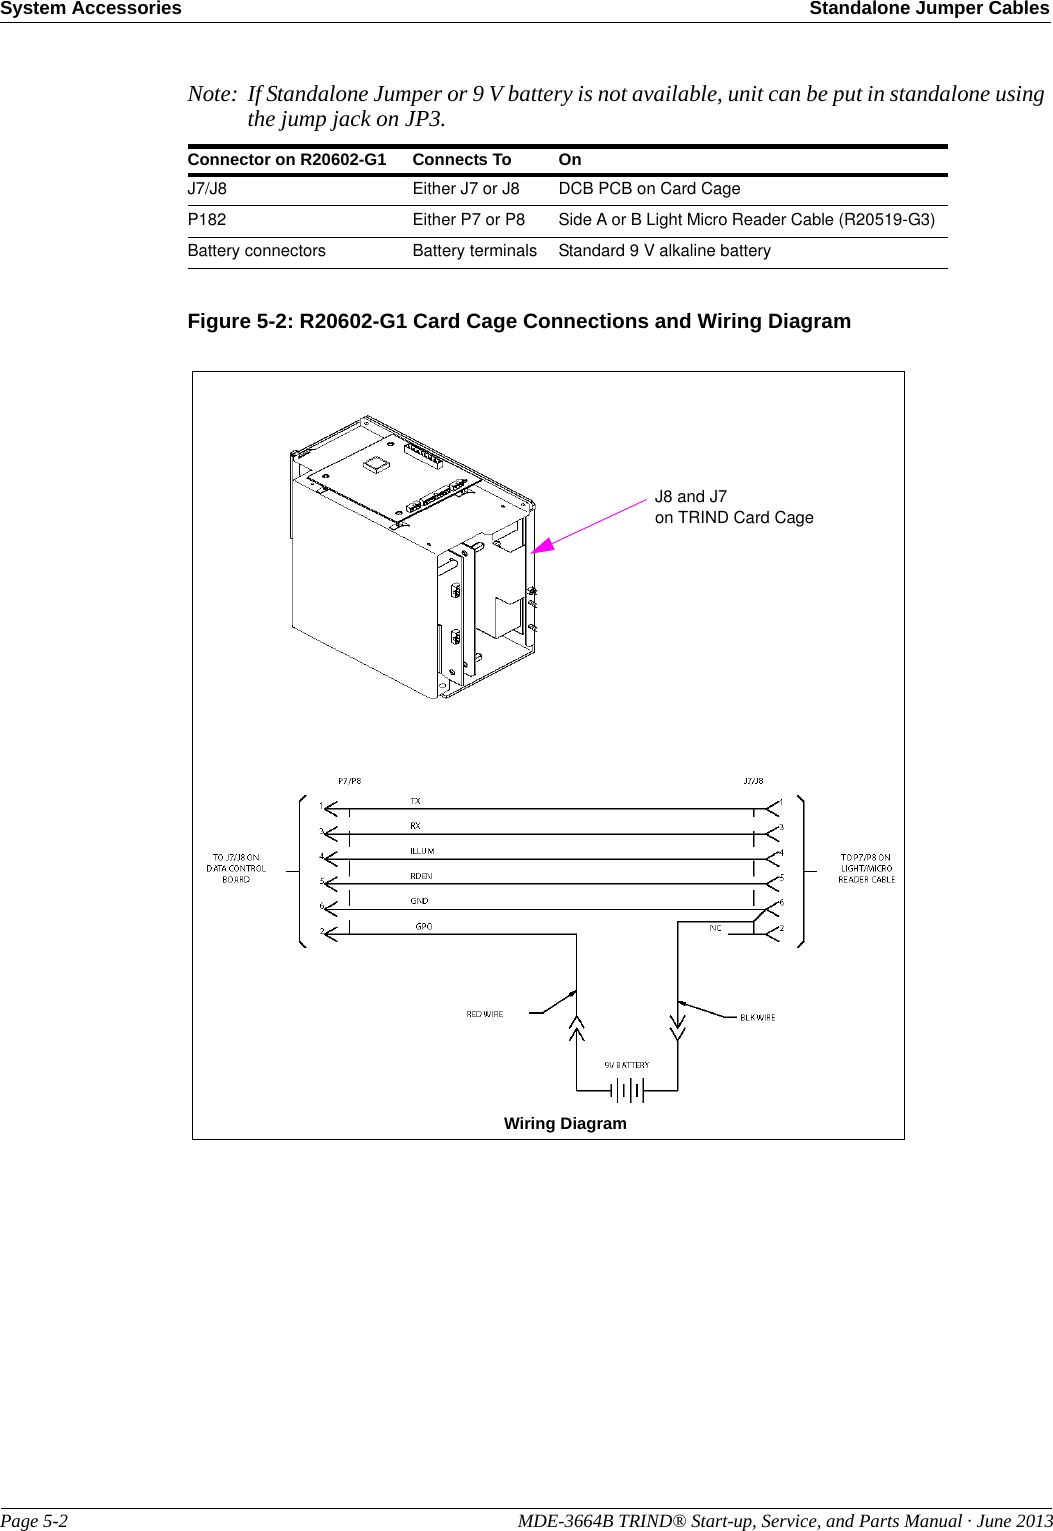 System Accessories Standalone Jumper CablesPage 5-2                                                                                                MDE-3664B TRIND® Start-up, Service, and Parts Manual · June 2013Note: If Standalone Jumper or 9 V battery is not available, unit can be put in standalone using the jump jack on JP3.Connector on R20602-G1 Connects To OnJ7/J8 Either J7 or J8  DCB PCB on Card CageP182 Either P7 or P8  Side A or B Light Micro Reader Cable (R20519-G3)Battery connectors Battery terminals Standard 9 V alkaline batteryFigure 5-2: R20602-G1 Card Cage Connections and Wiring Diagram J8 and J7on TRIND Card CageWiring Diagram